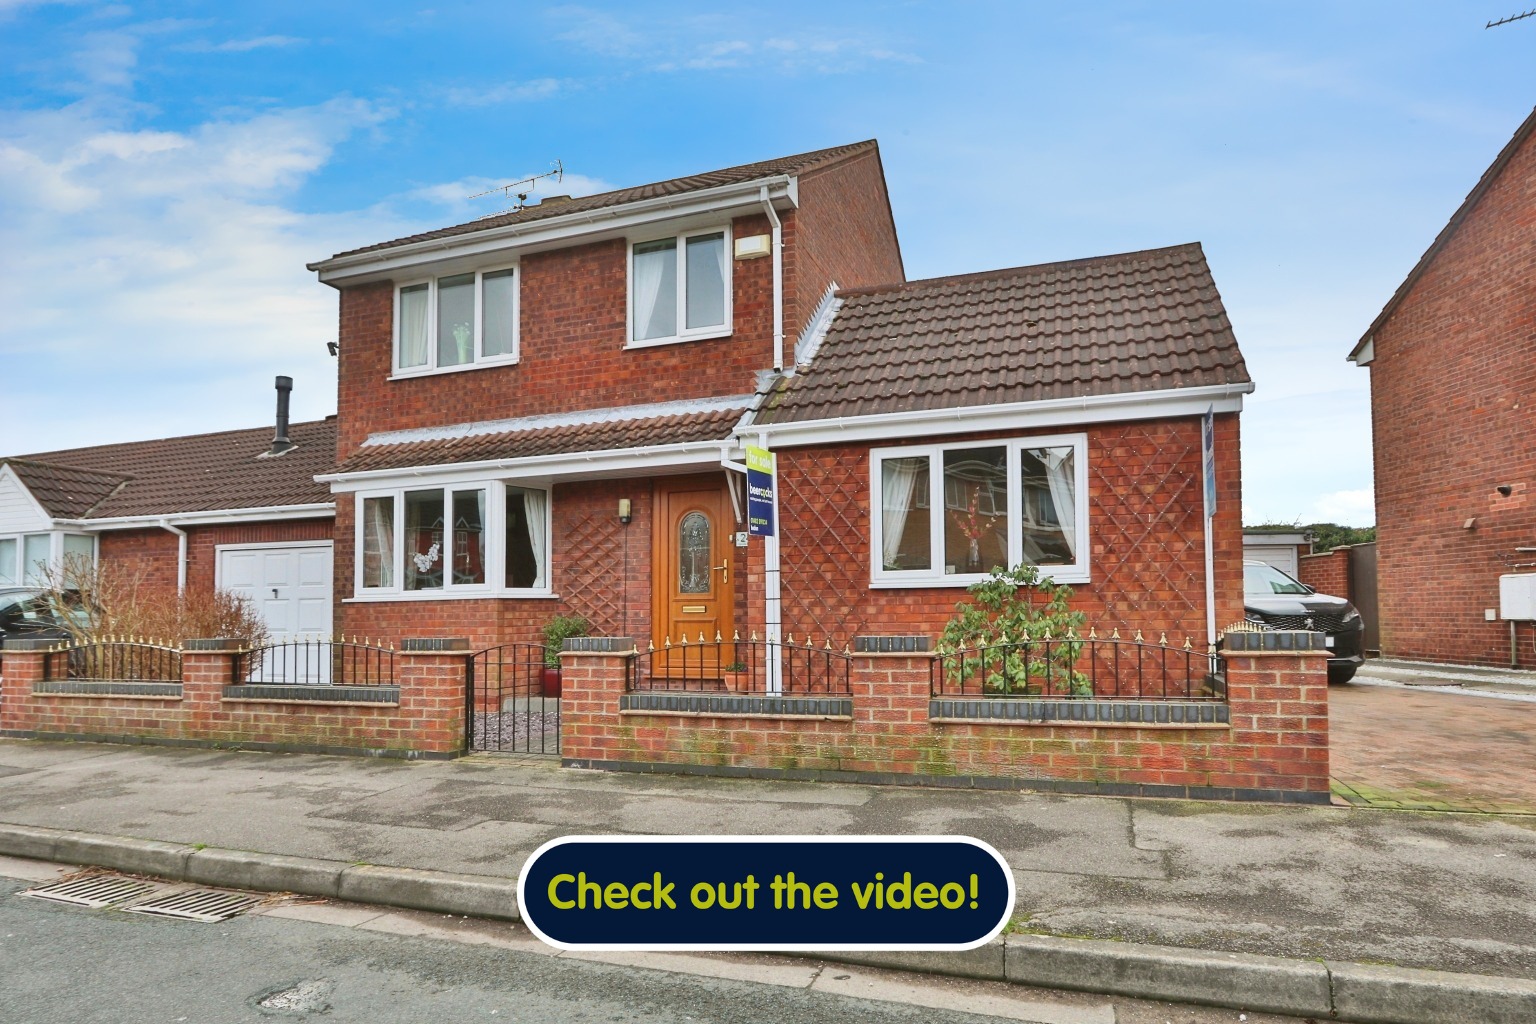 4 bed detached house for sale in Greville Road, Hull - Property Image 1